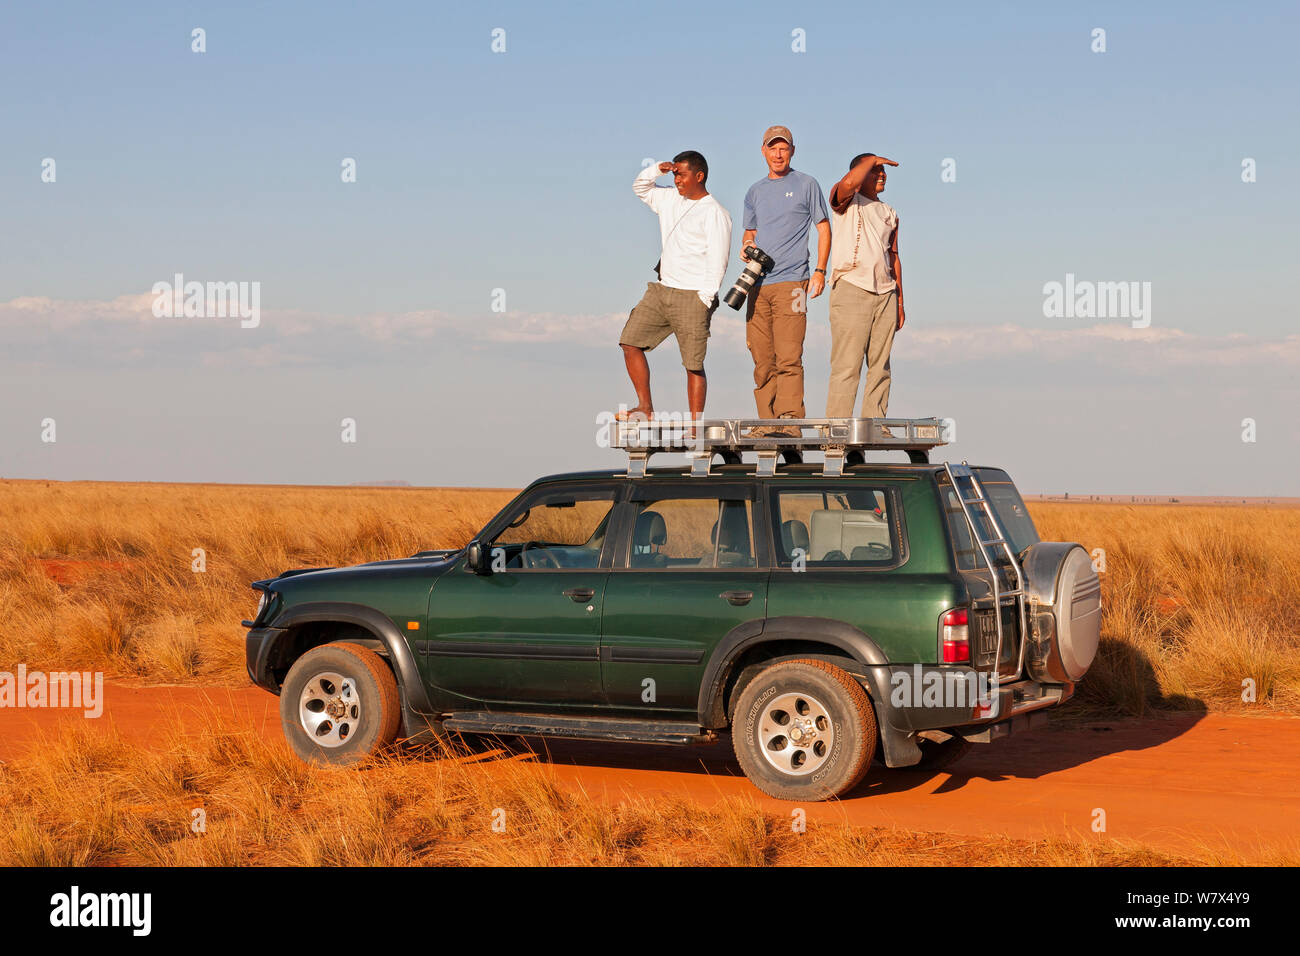 Wildlife Photographer Ingo Arndt with driver and assistant searching for migratory locust swarms near Isalo National Park, Madagascar, August 2013. Stock Photo